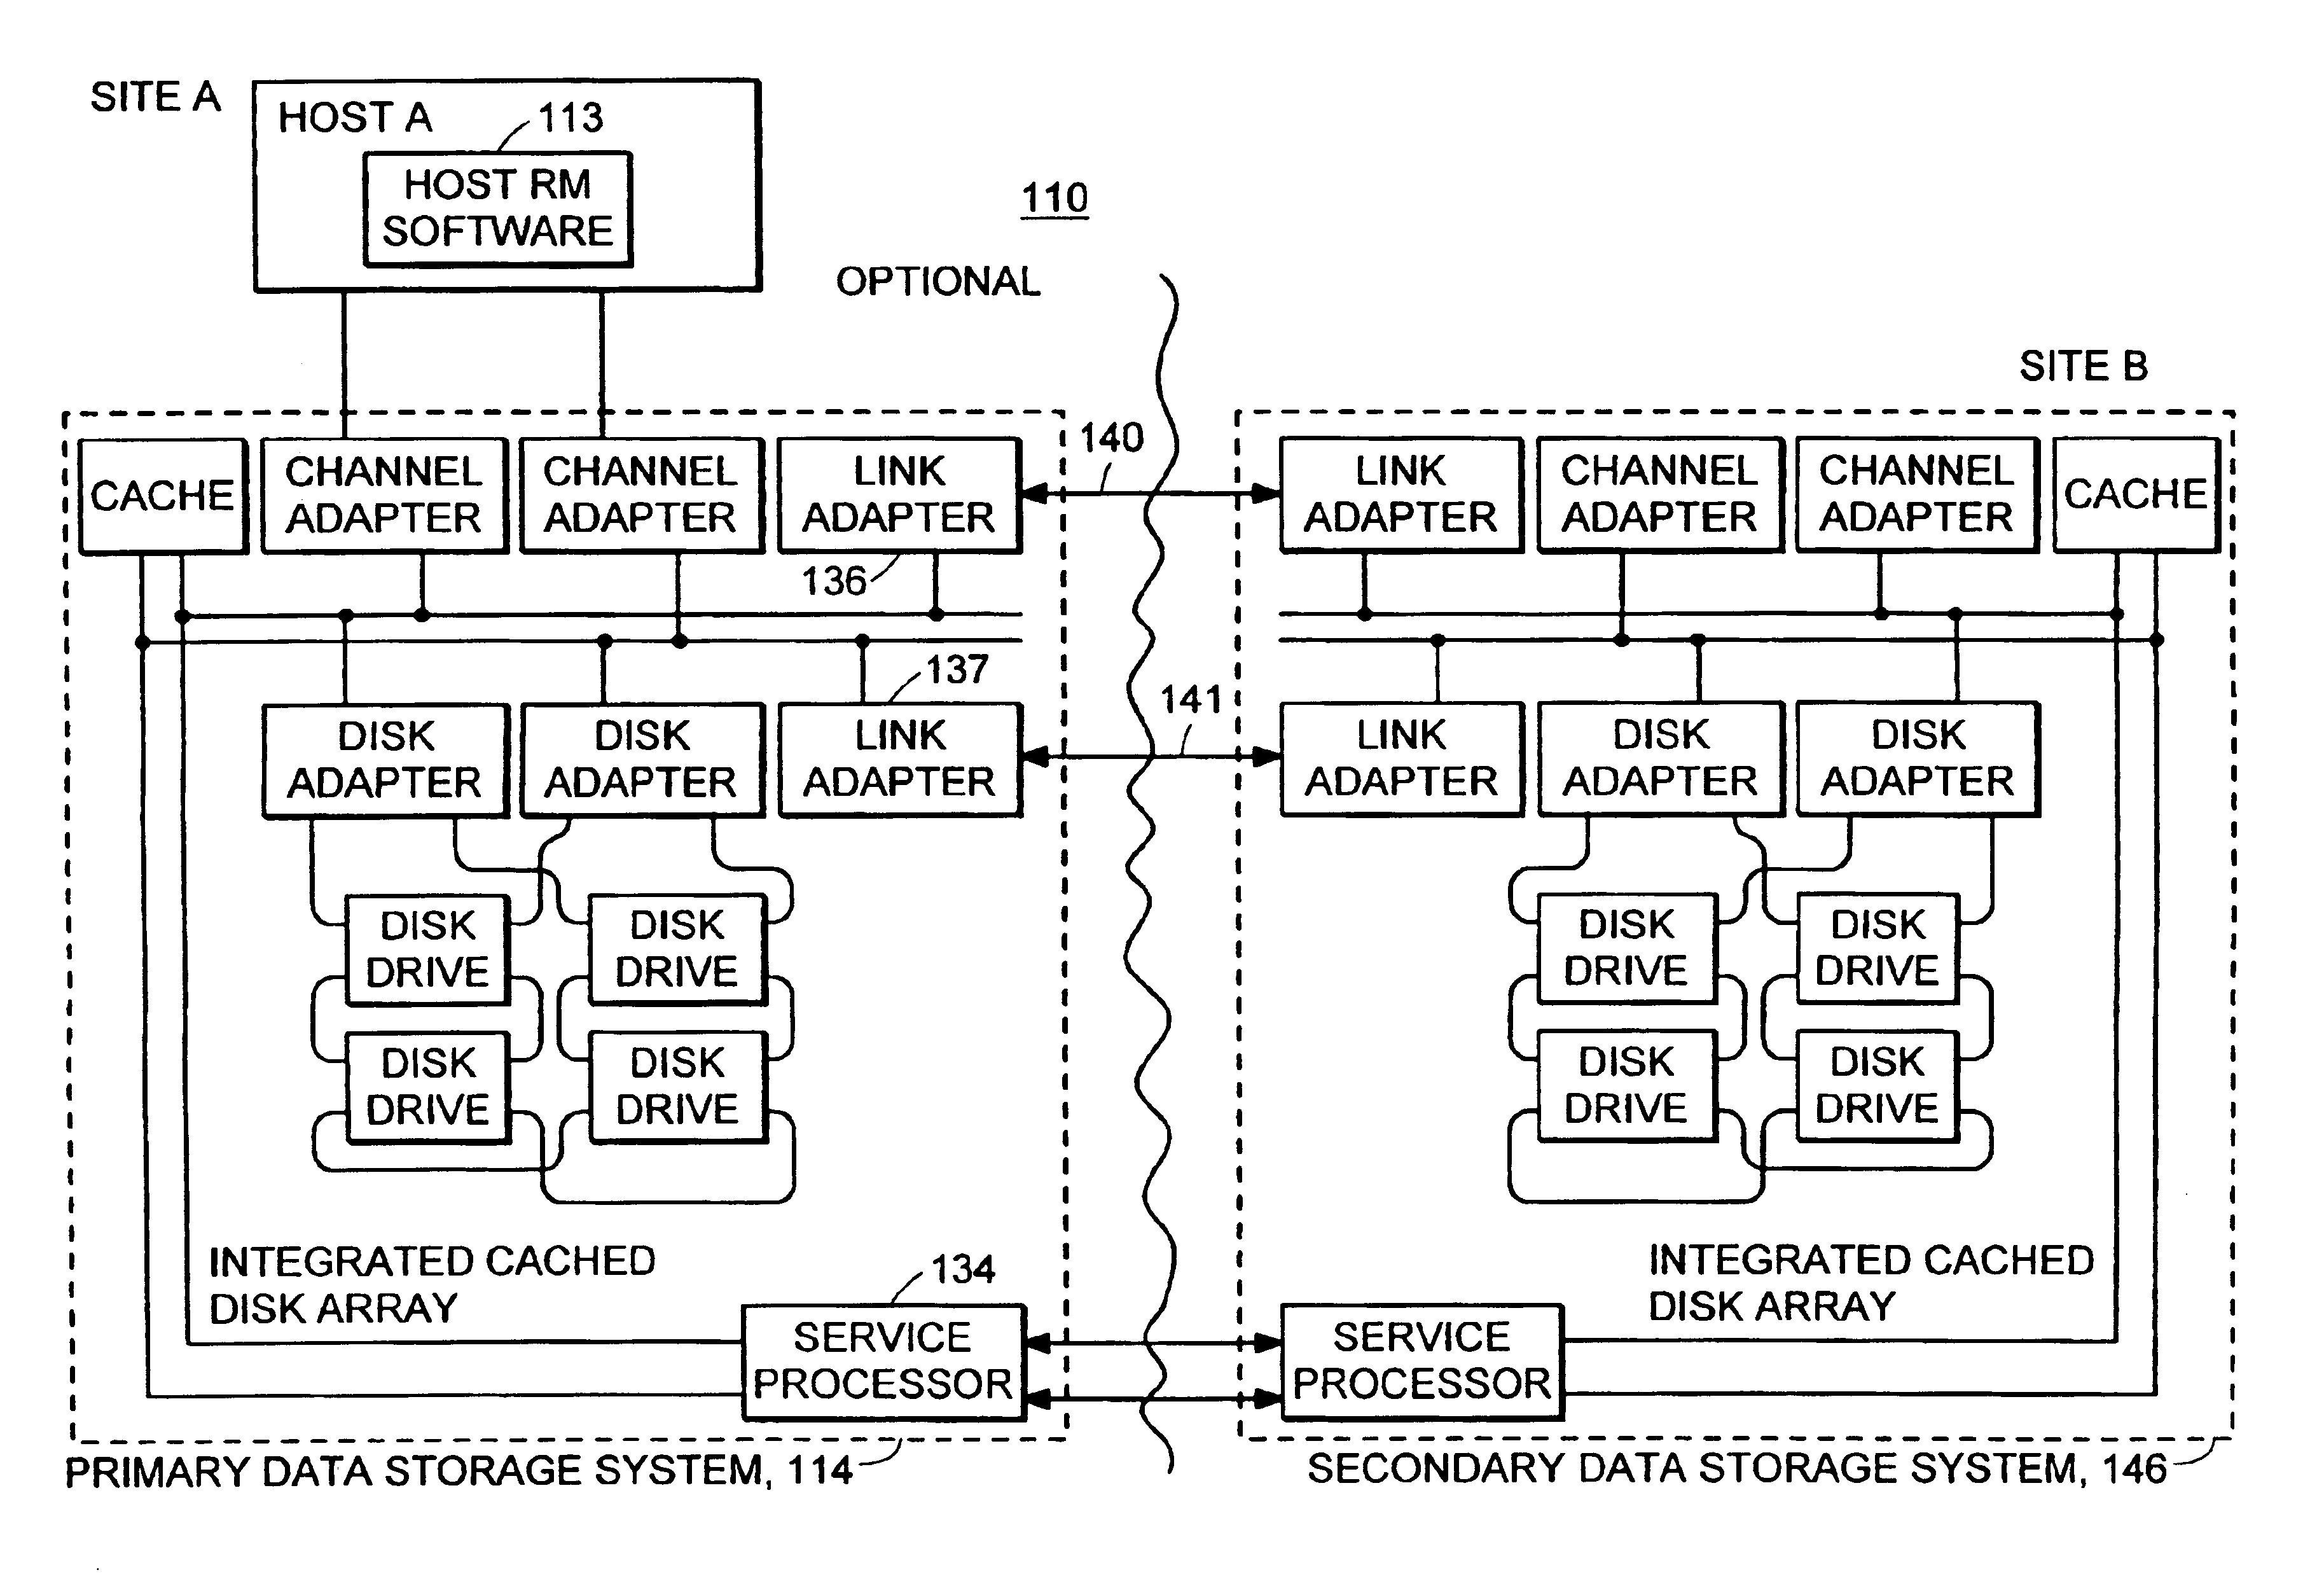 System maps SCSI device with virtual logical unit number and multicast address for efficient data replication over TCP/IP network